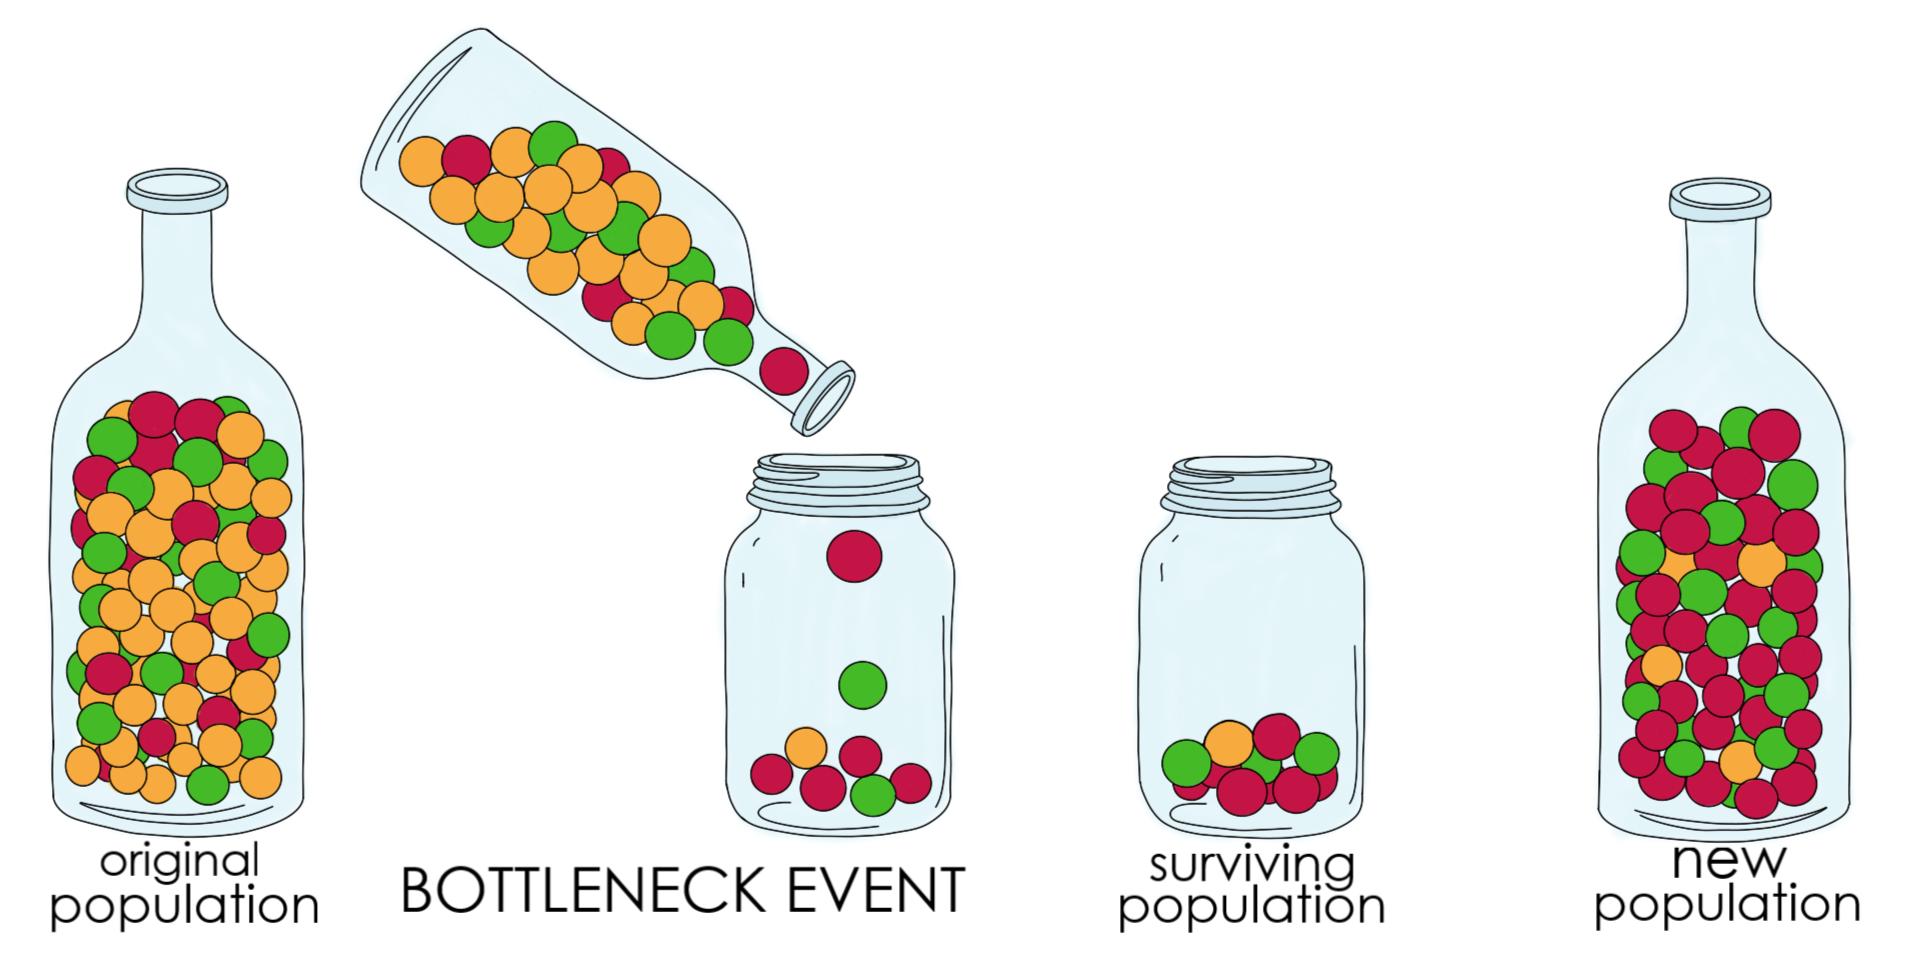 16 Mind-Blowing Facts About Bottleneck Effect - Facts.net